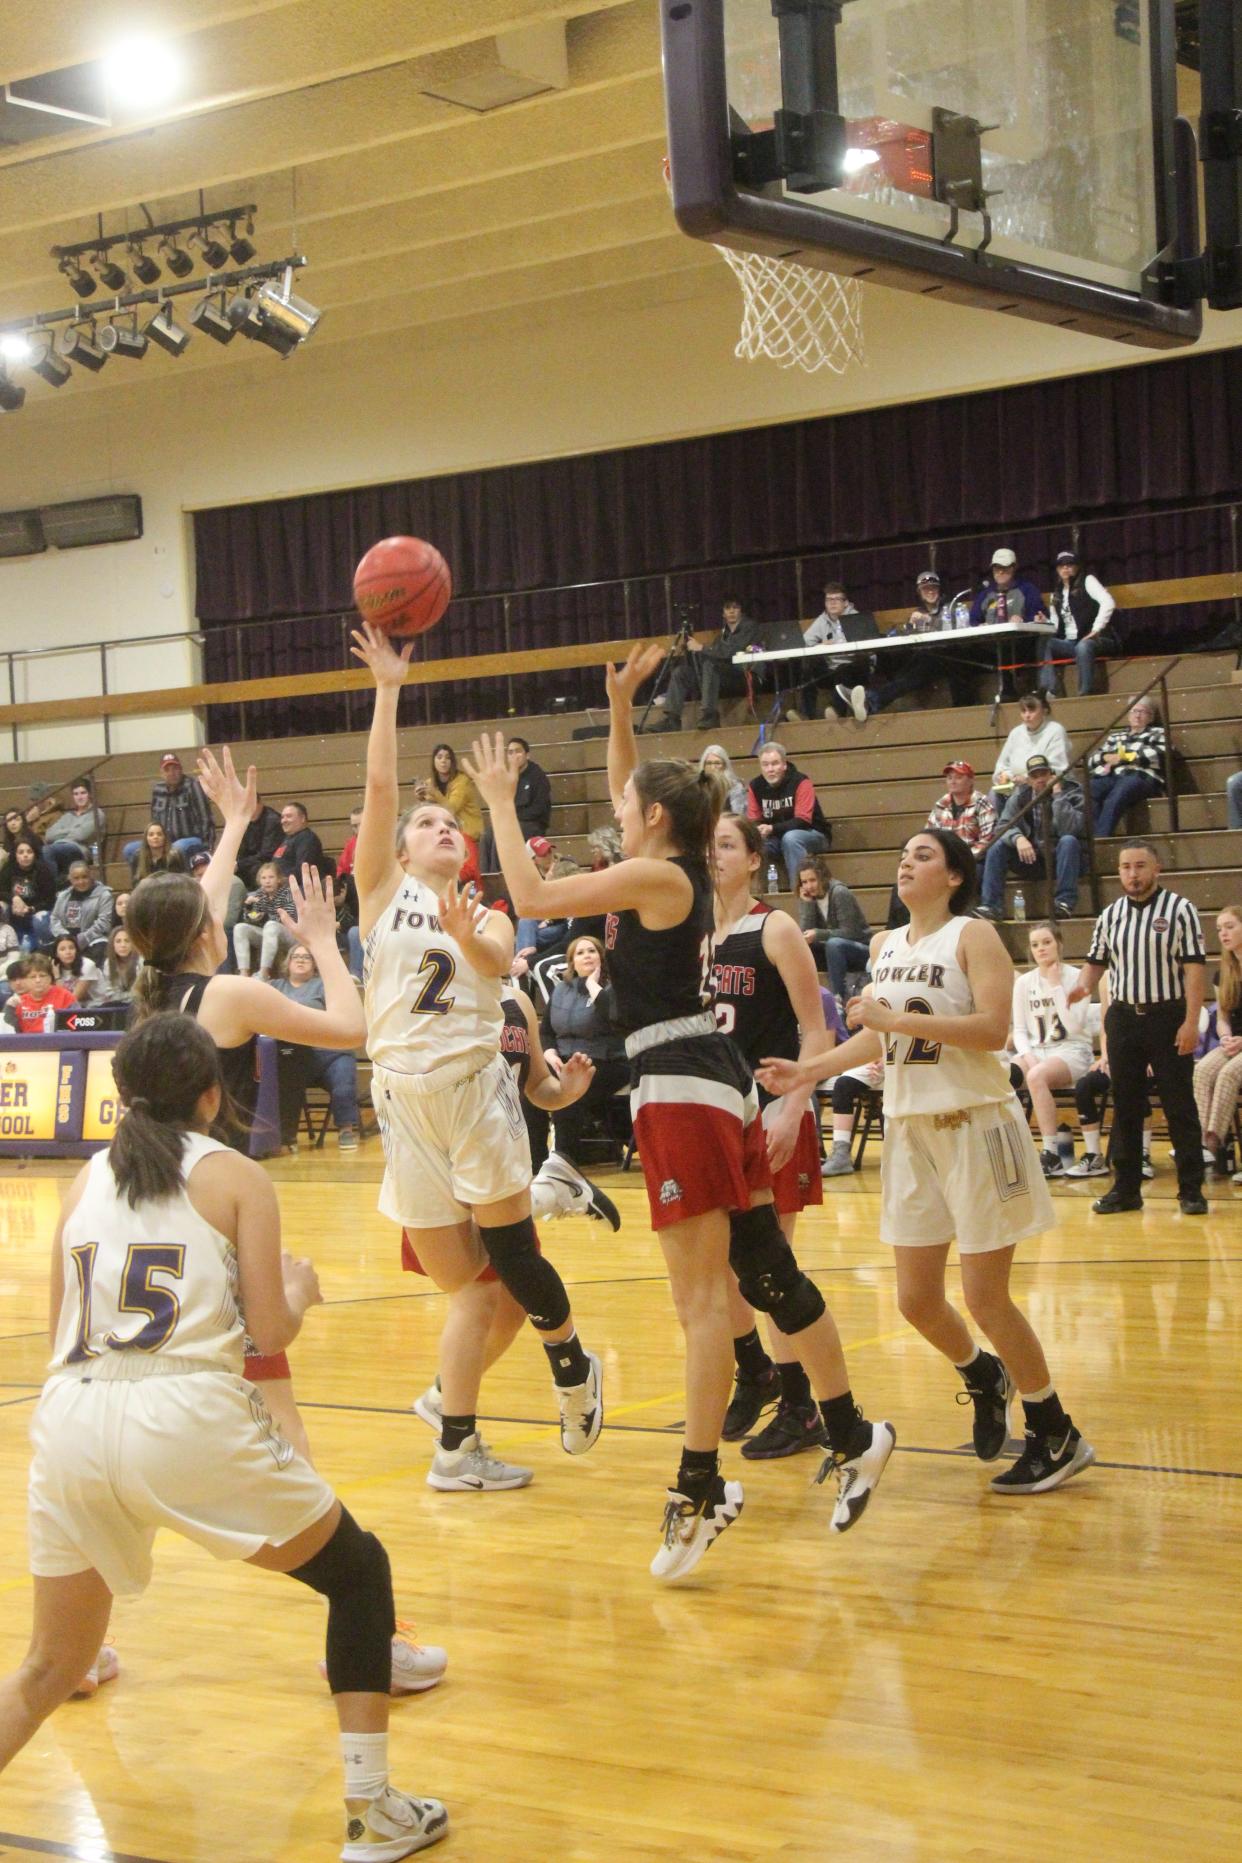 Alyssa Maestas shoots over the outstretched arm of a Holly defender as teammates Olivia Romero (15) and Gracie Osbourne (22) position themselves for an offensive rebound. Maestas led Fowler in scoring with 13 points.